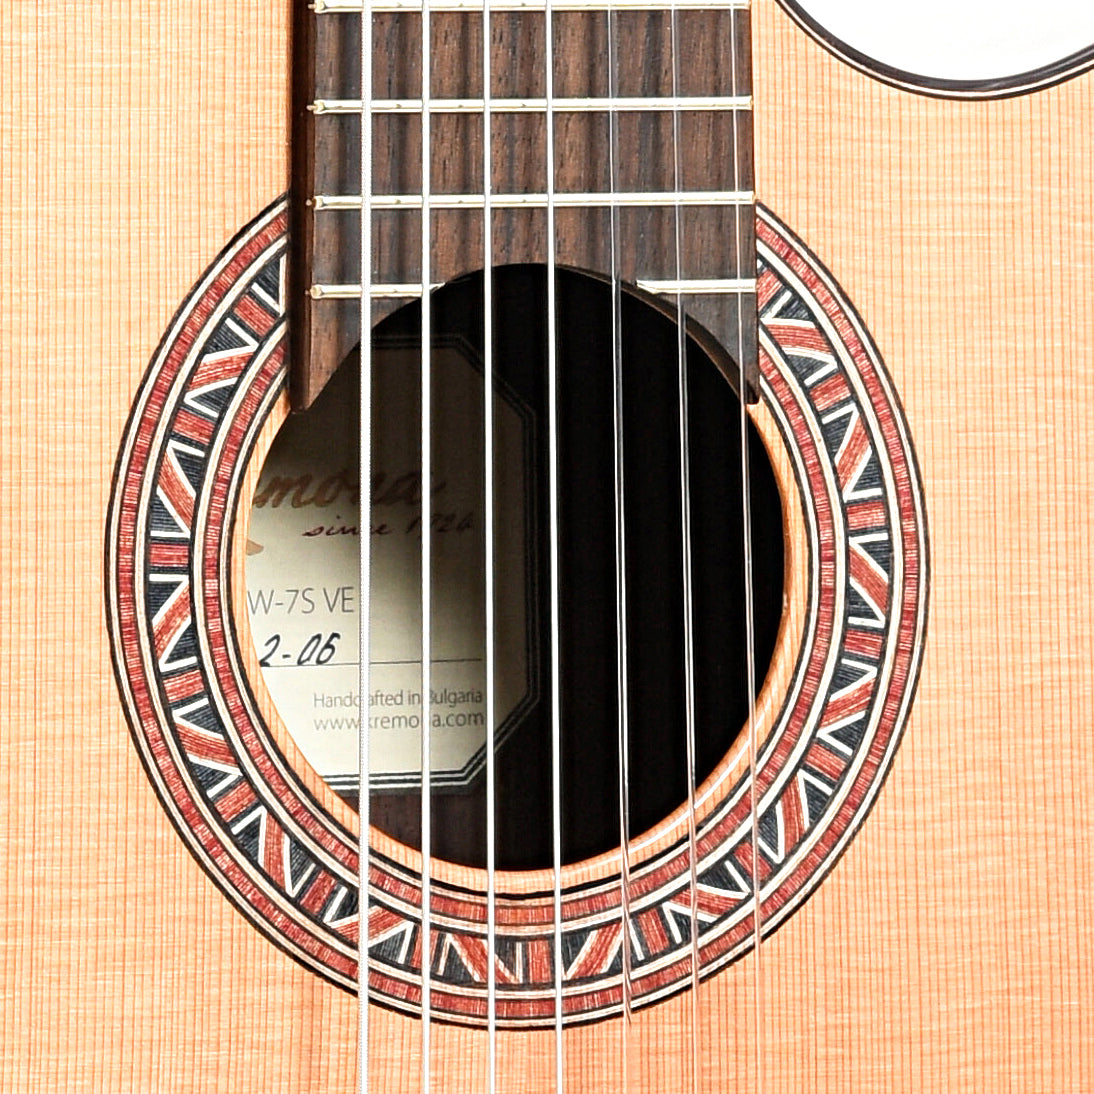 sound hole of Kremona F65CW-7S-VE 7-String Classical 